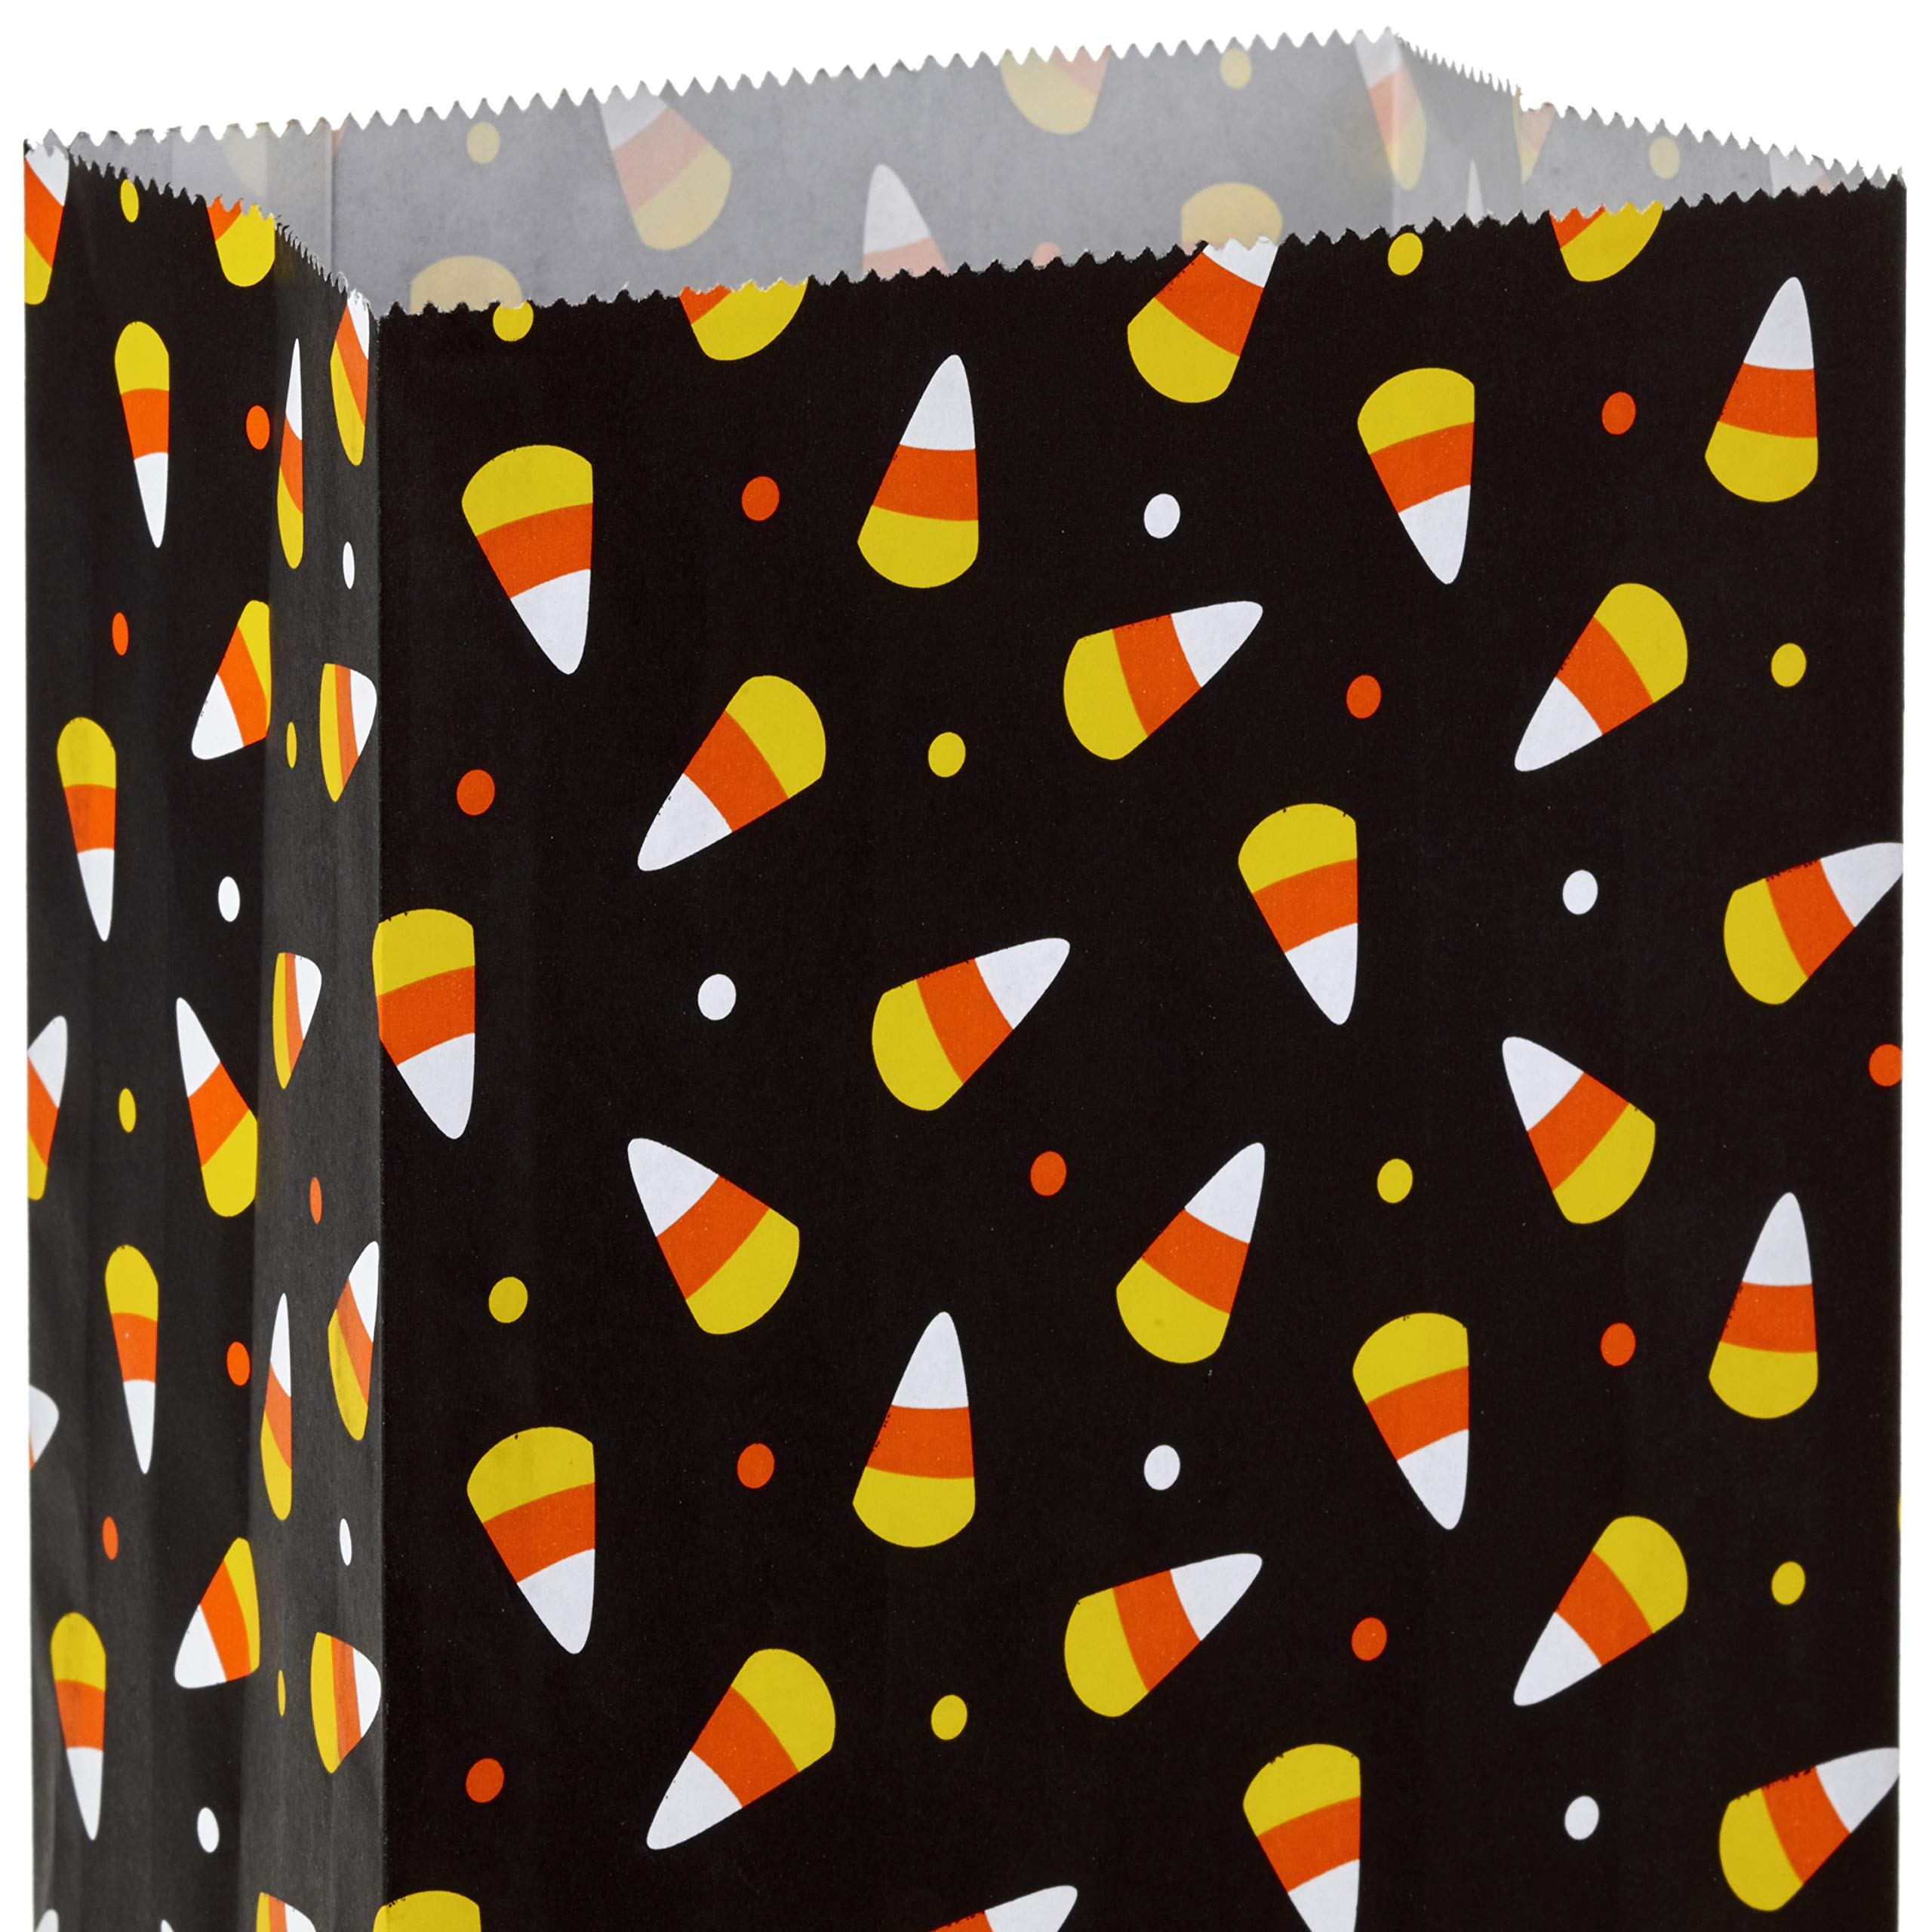 Hallmark Halloween Party Favor and Wrapped Treat Bags (15 Ct., Candy Corn) for Trick or Treating, Class Parties, Crafts and More